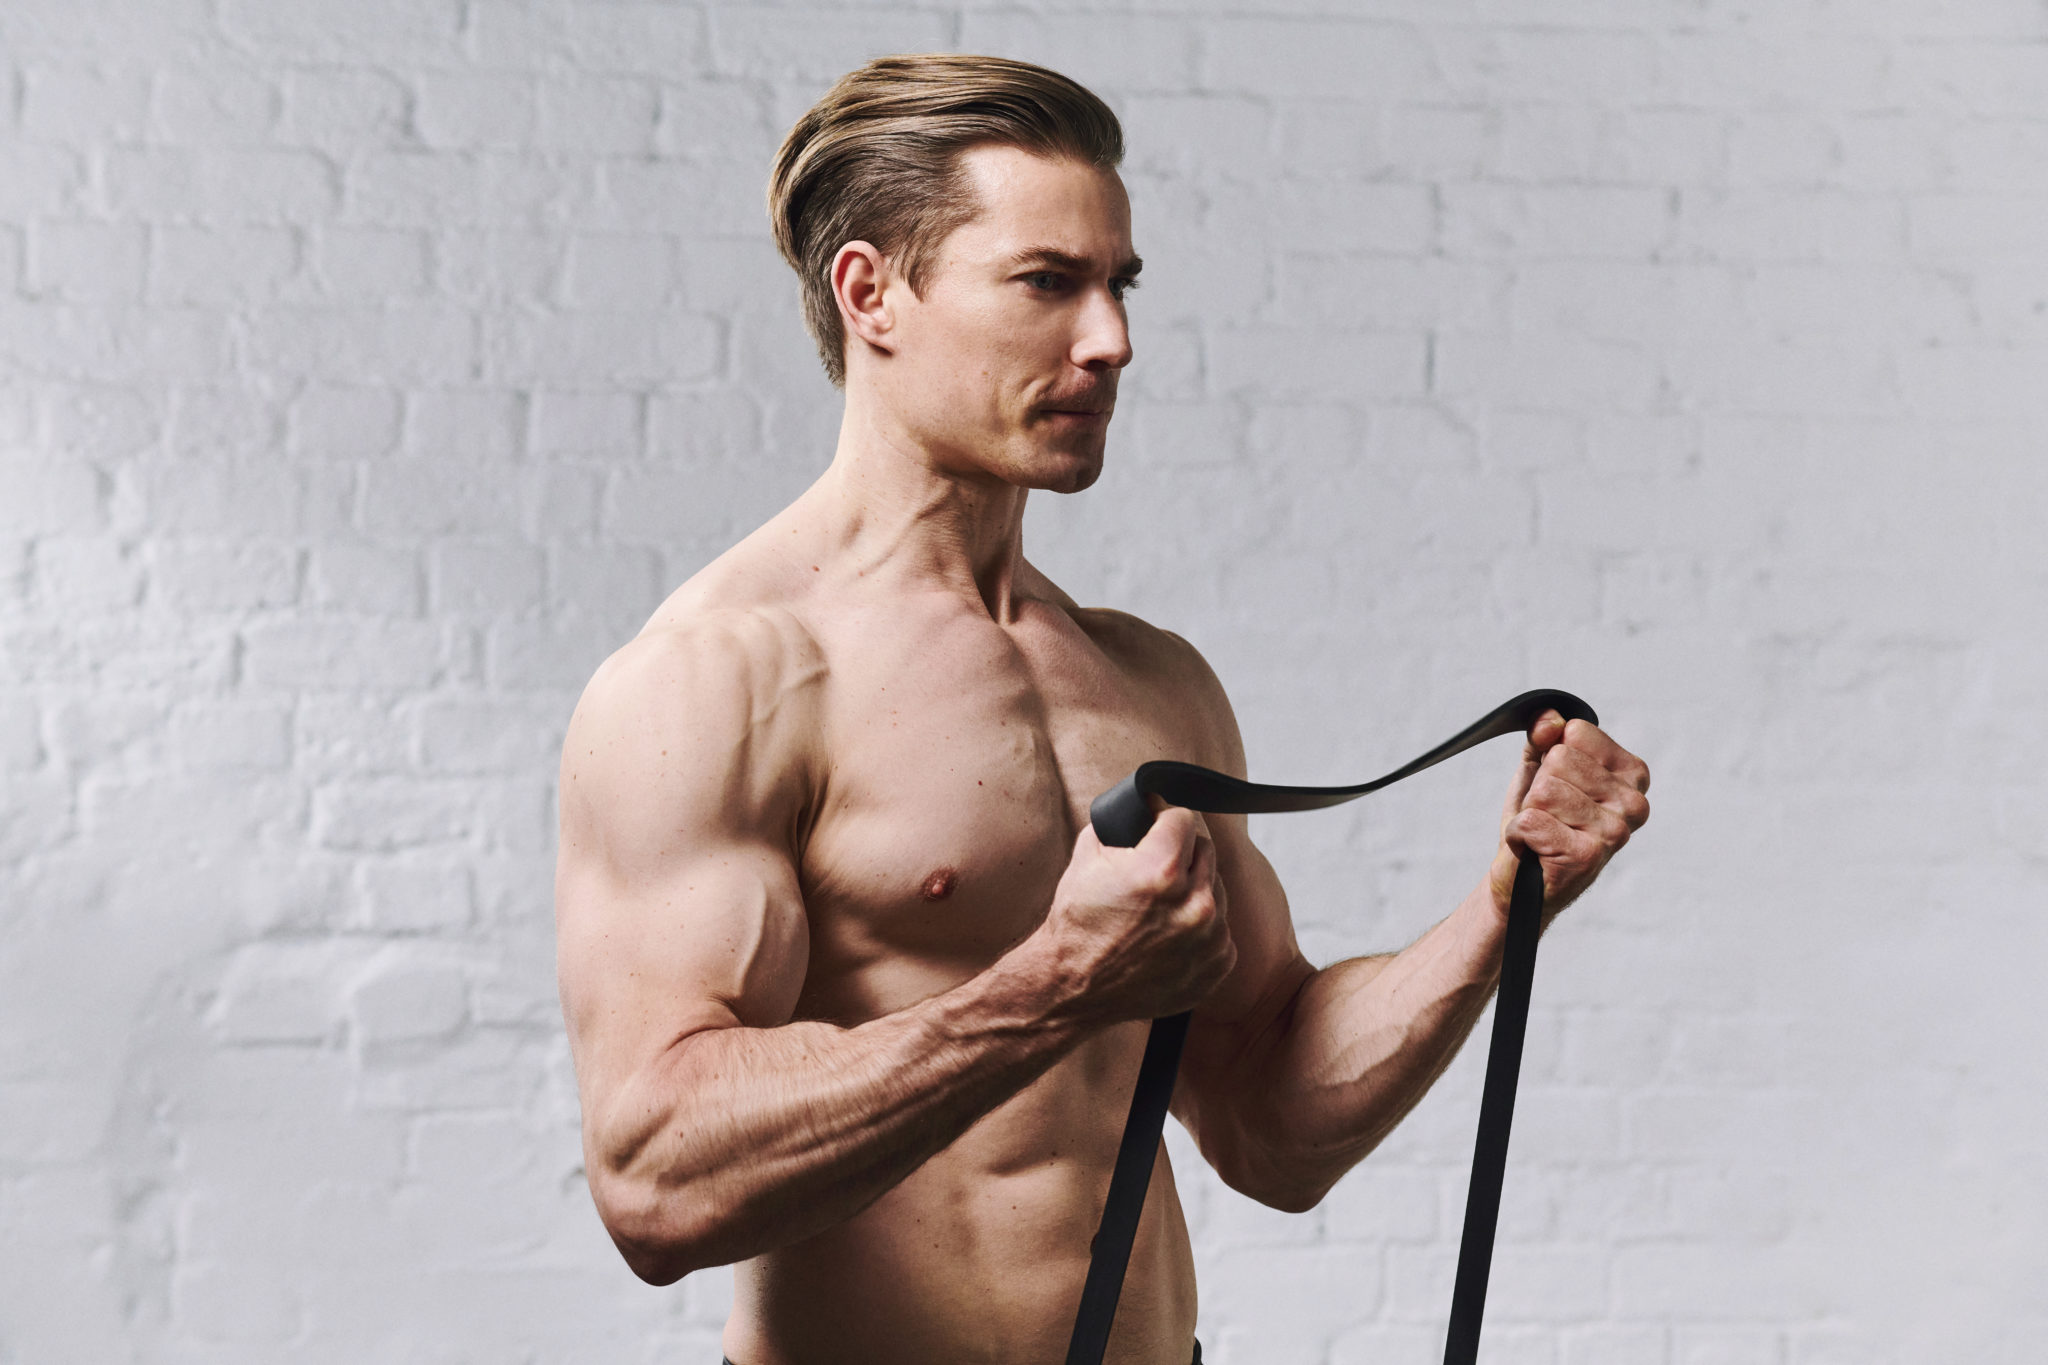 Resistance Band Training: The Ultimate Guide to Strength Training at Home